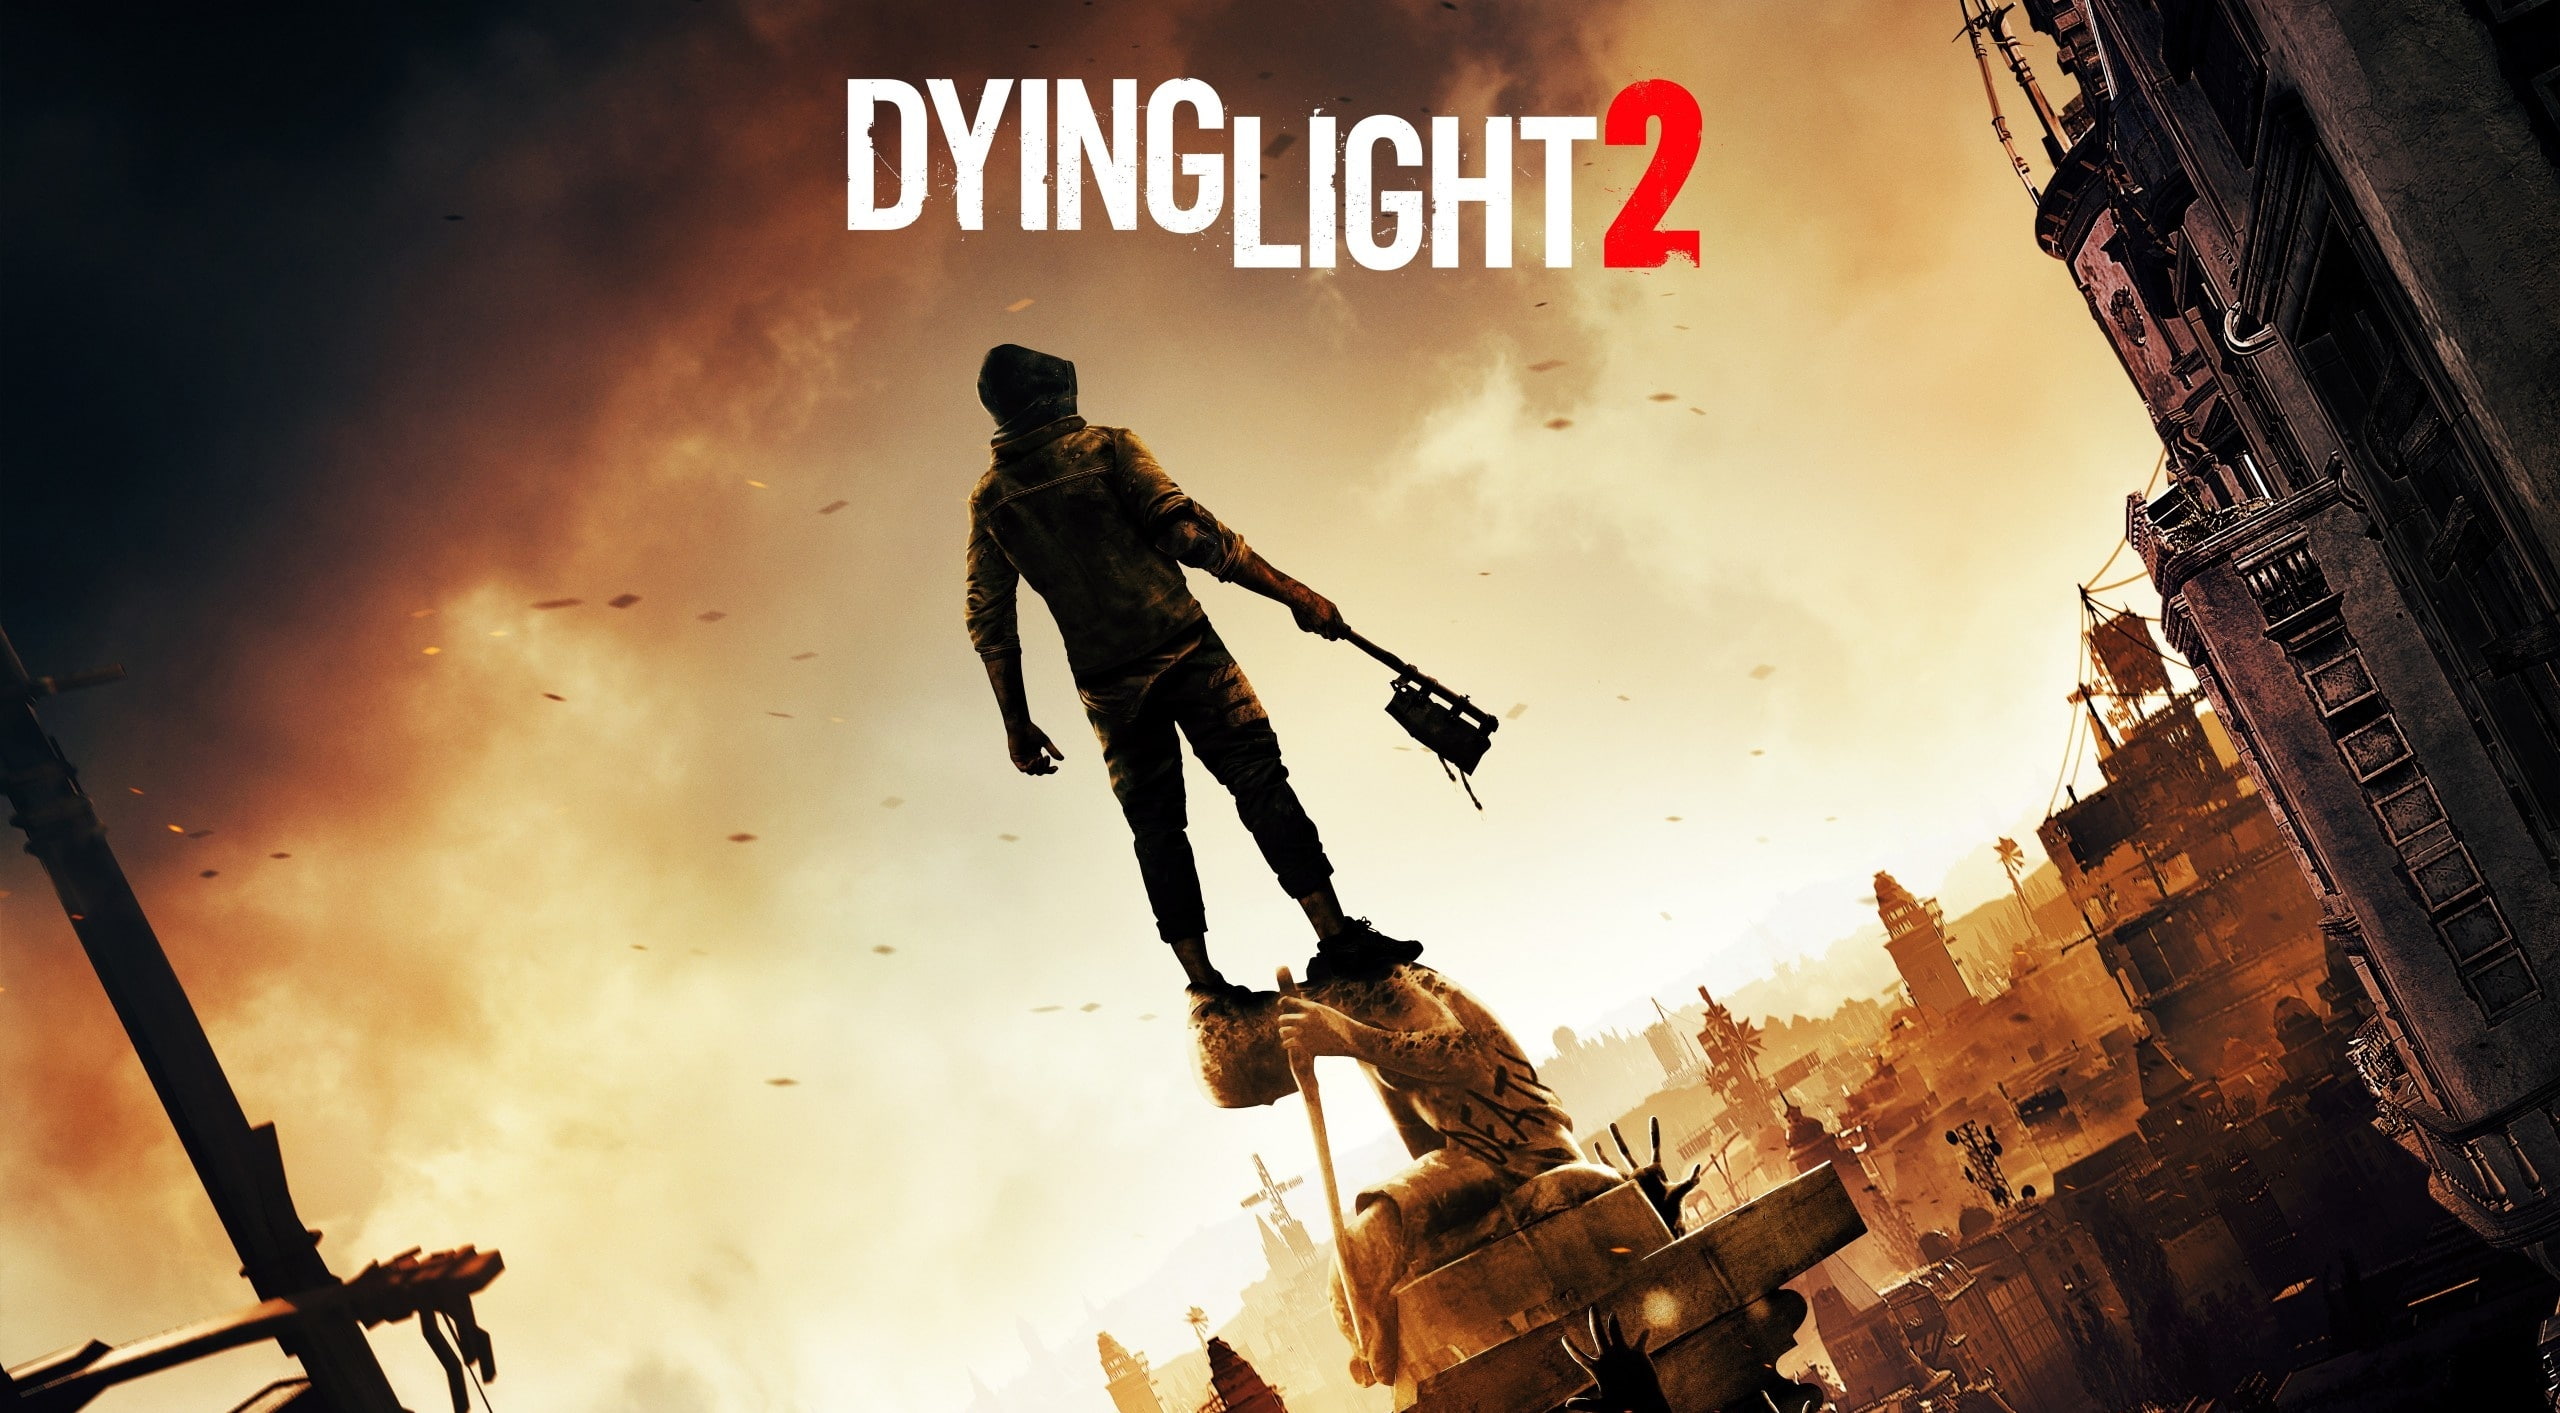 Dying Light 2 E3 2018, Games, Other Games, videogame, dyinglight